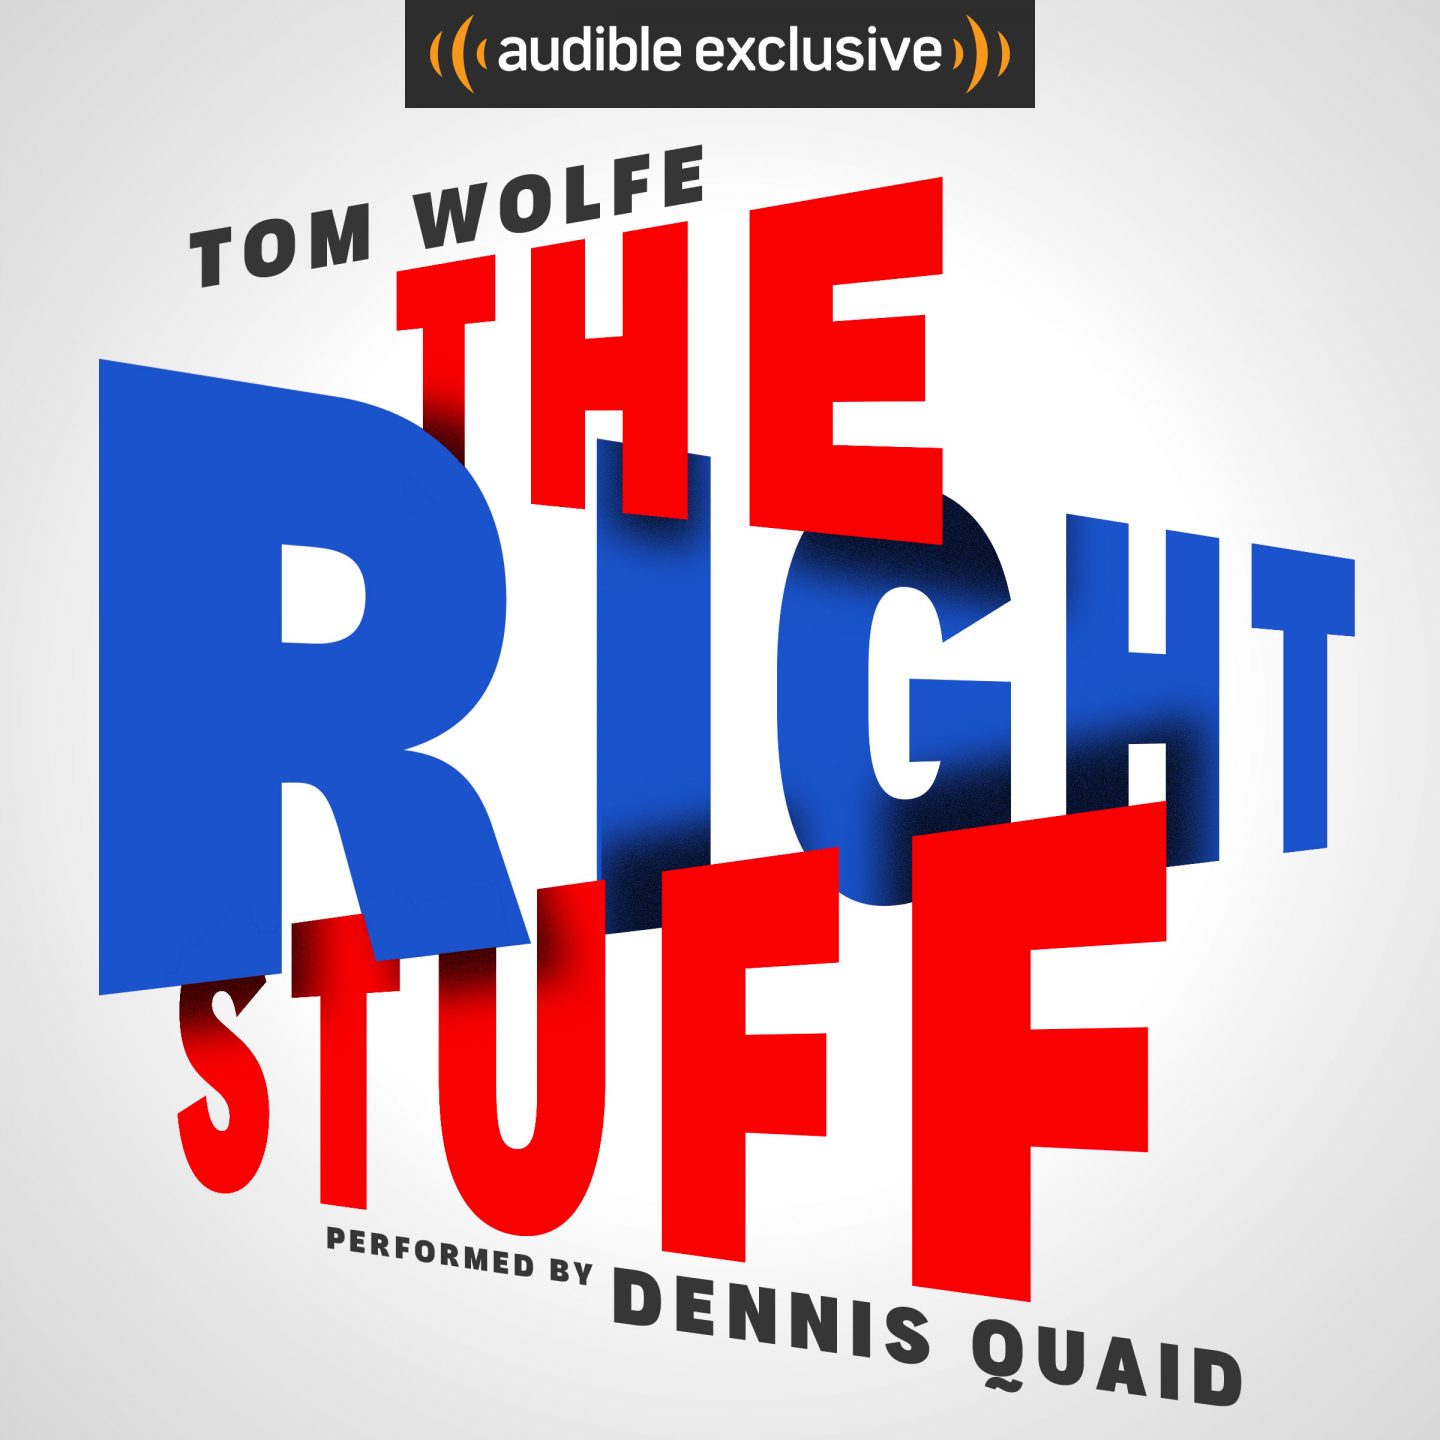 Tom Wolfe's The Right Stuff performed by Dennis Quaid (Audible)